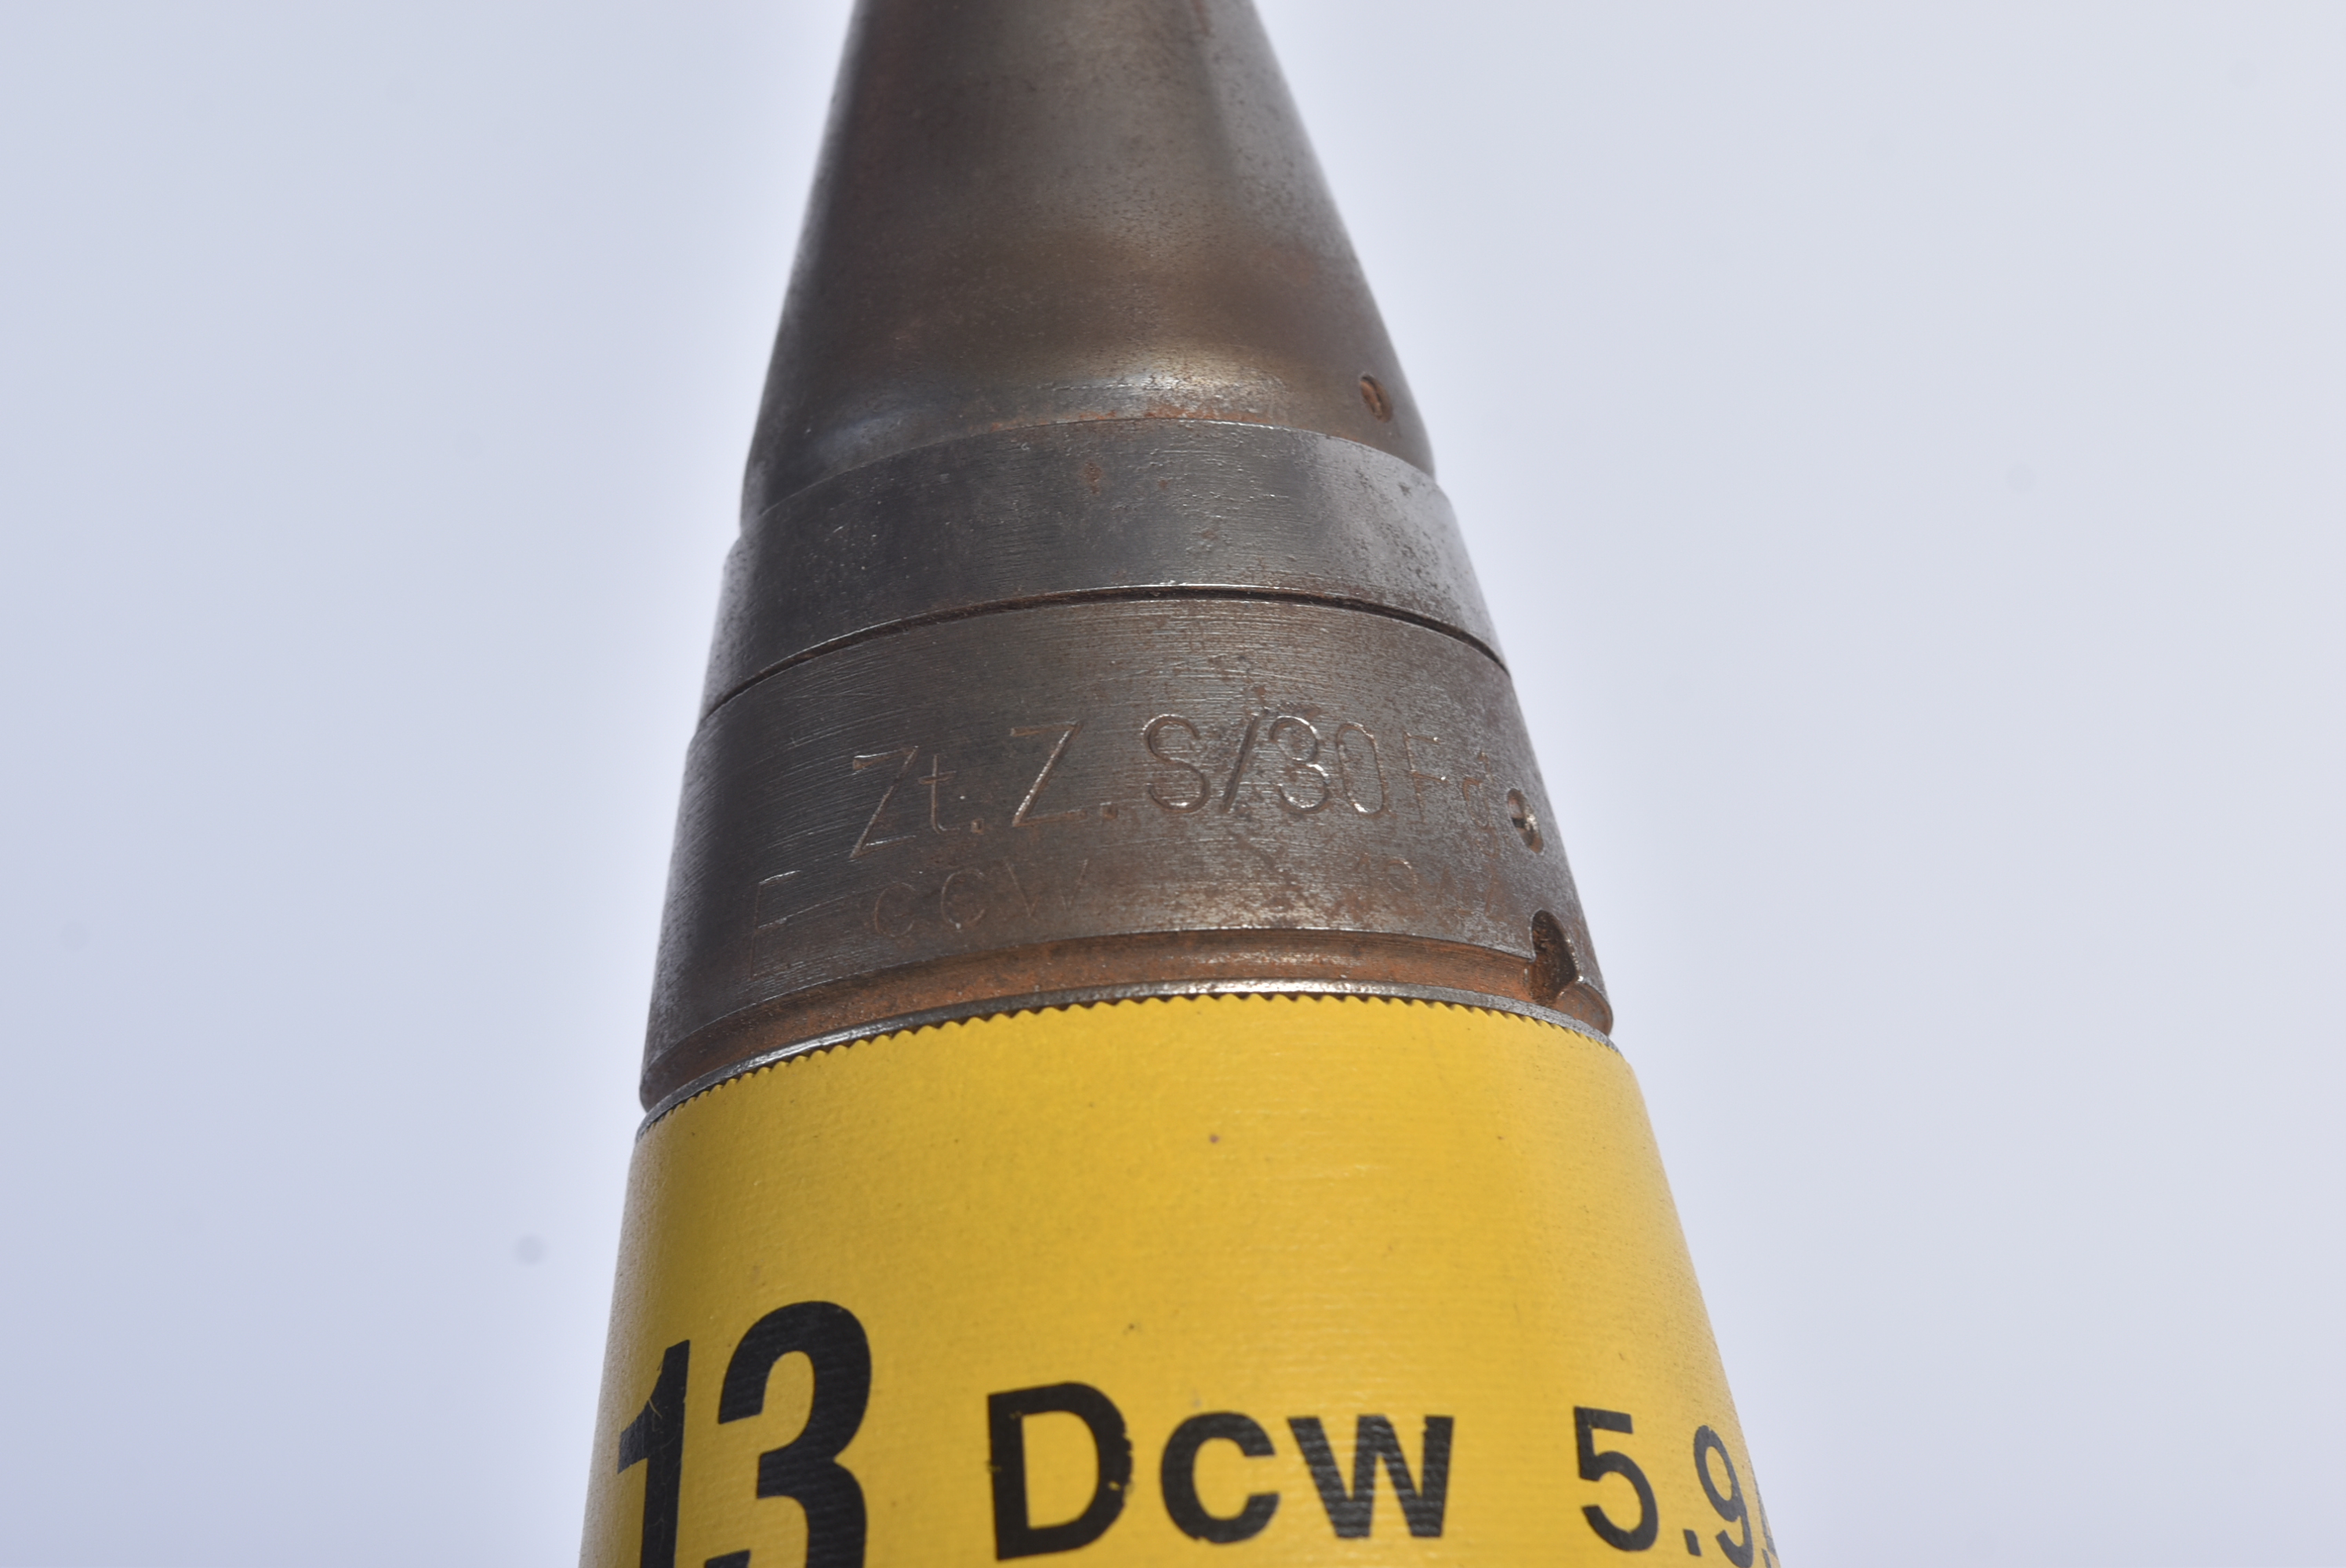 WWII SECOND WORLD WAR GERMAN PANZER TANK AMMUNITION PROJECTILE - Image 7 of 8